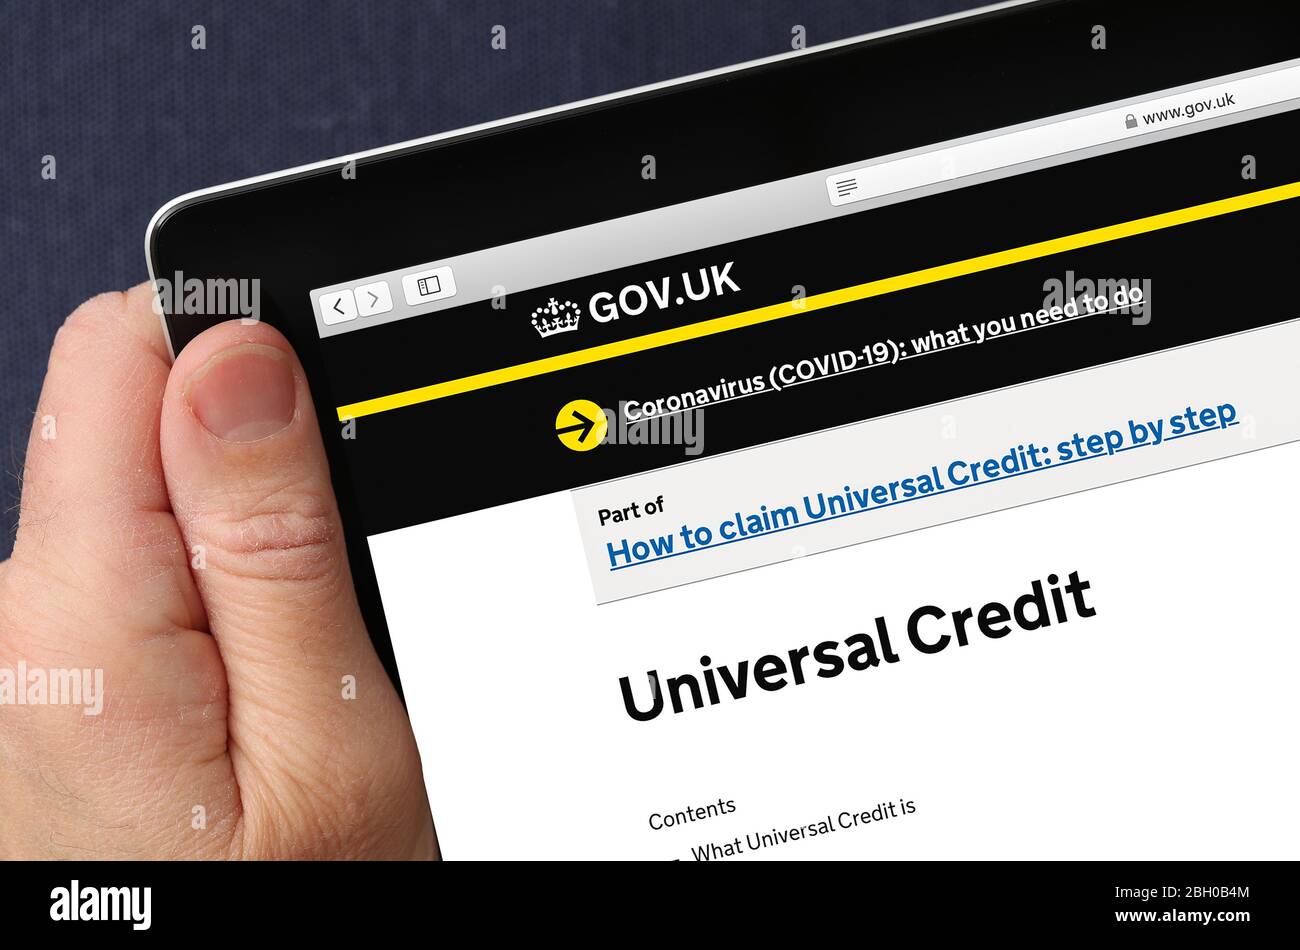 UK Government Universal Credit website with advice on how to claim financial support due to coronavirus. Stock Photo